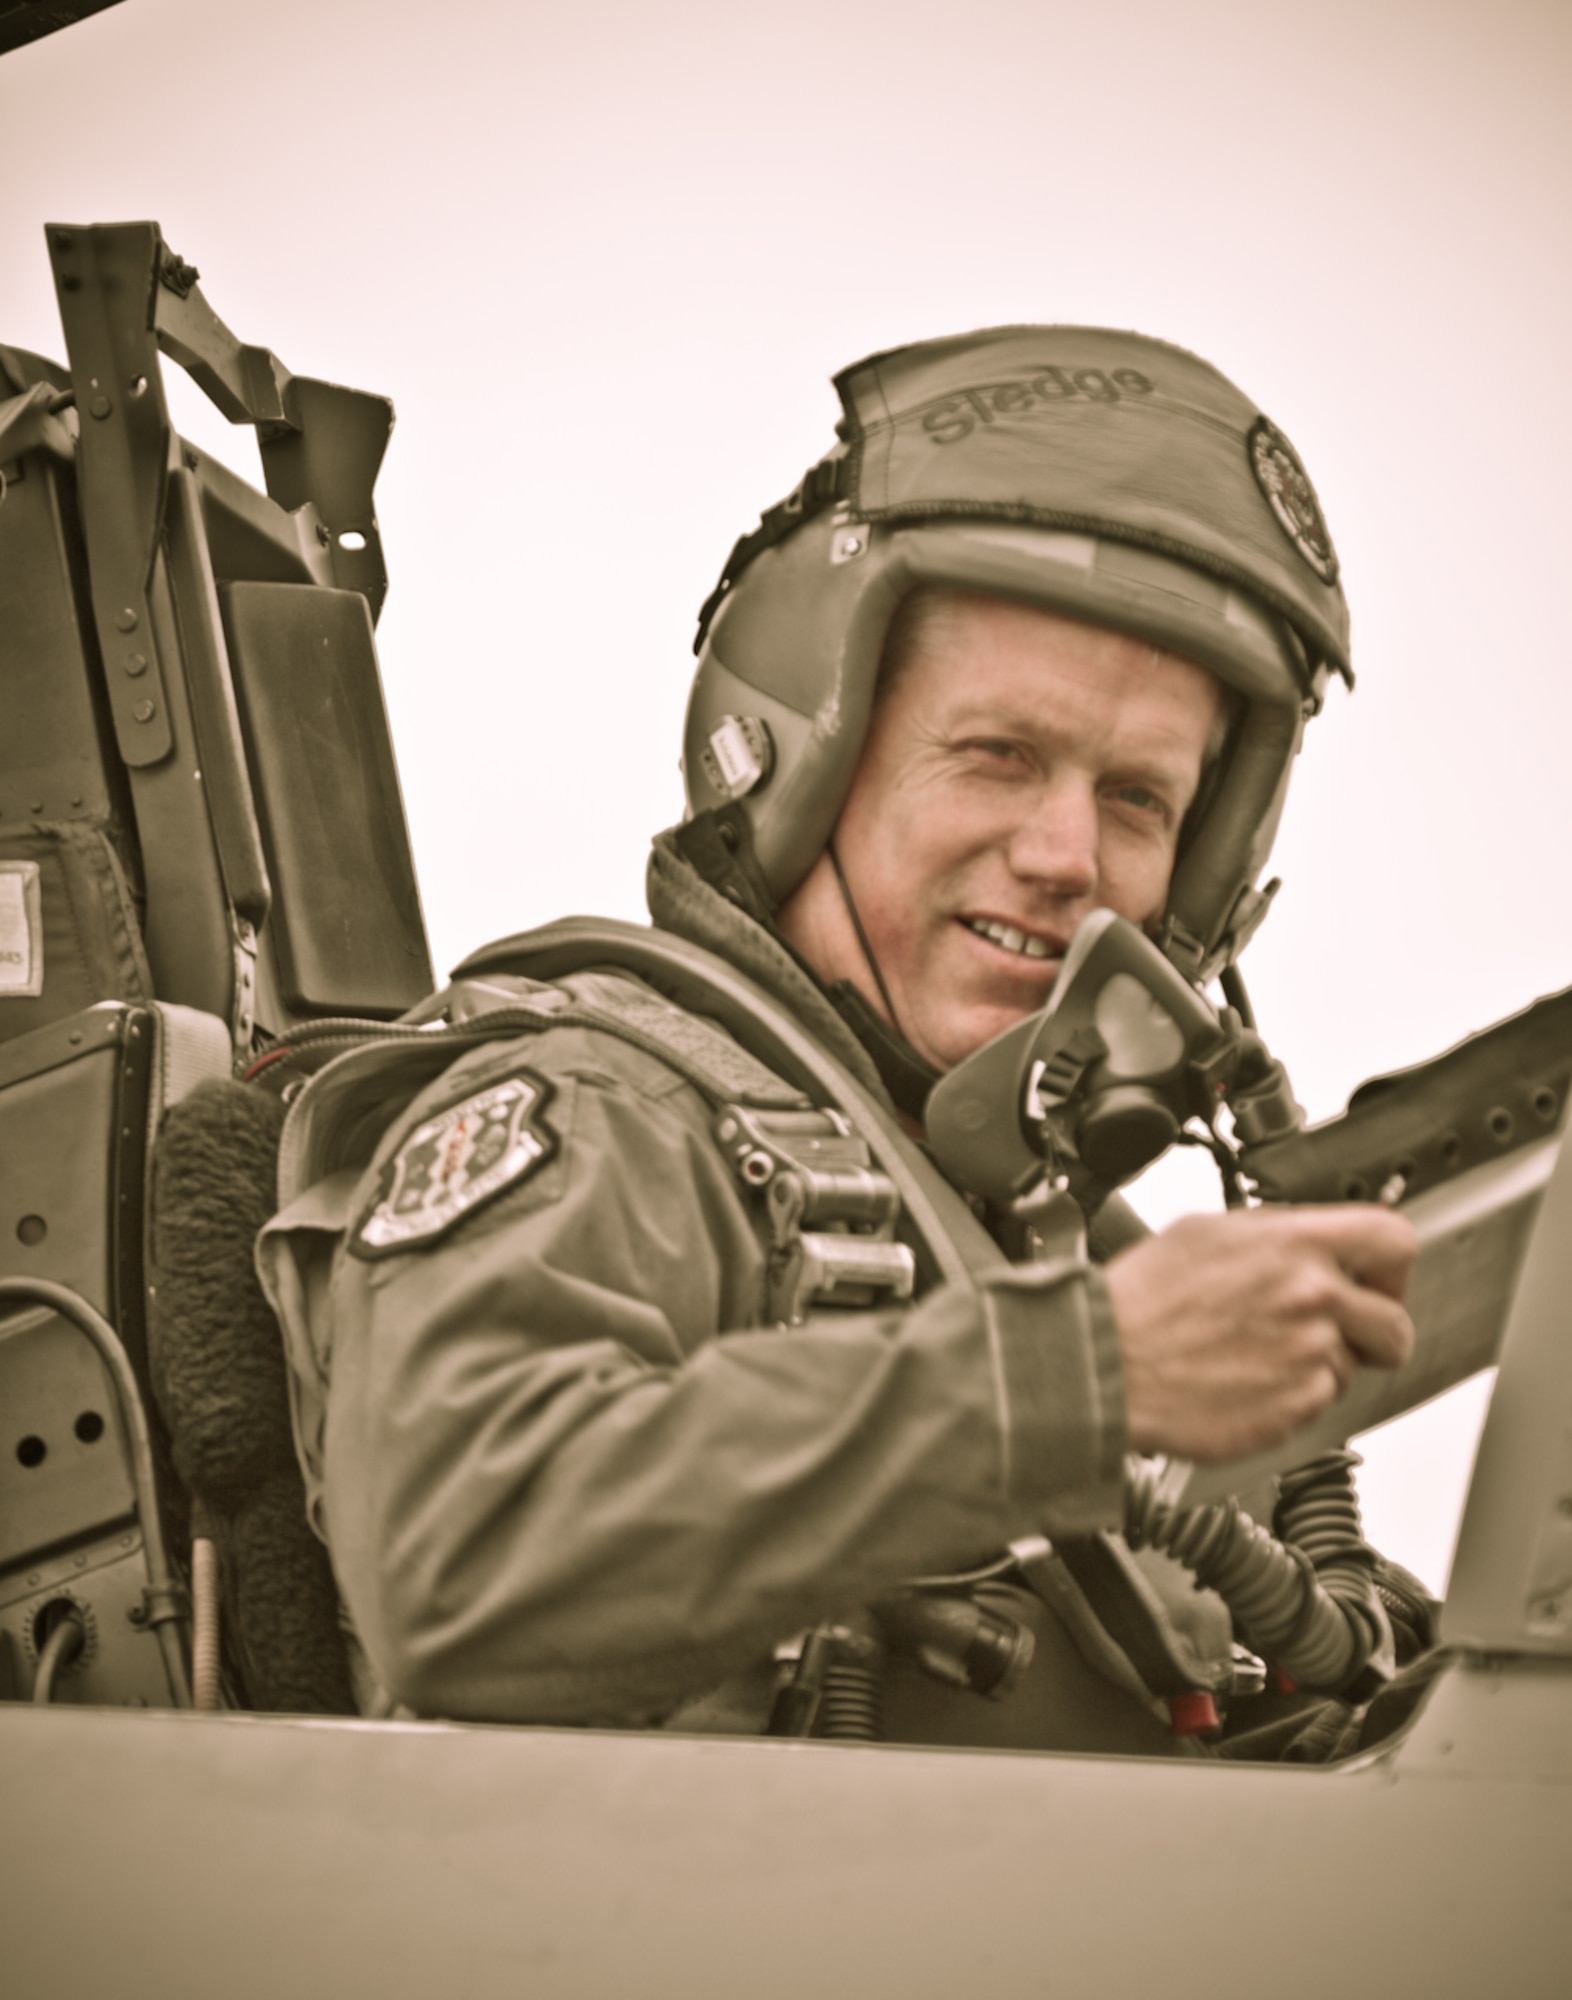 Col. Todd Harmer, 33rd Fighter Wing commander, prepares to take off in an F-15 Eagle during the unit's last large force deployment exercise that occurred in Savannah, Ga., May 11-21. In fulfillment of the wing's transition to Air Education and Training Command, the commander will fly the last F-15 of 54 aircraft to its final destination in Tucson, Ariz., Sept. 8. It will be Colonel Harmer’s last flight before departing on a one-year deployment to Southwest Asia and leaving his office empty for a new wing commander Oct. 1, when the official transition will take place. (U.S. Air Force photo/Tech. Sgt. Russ Wells) 